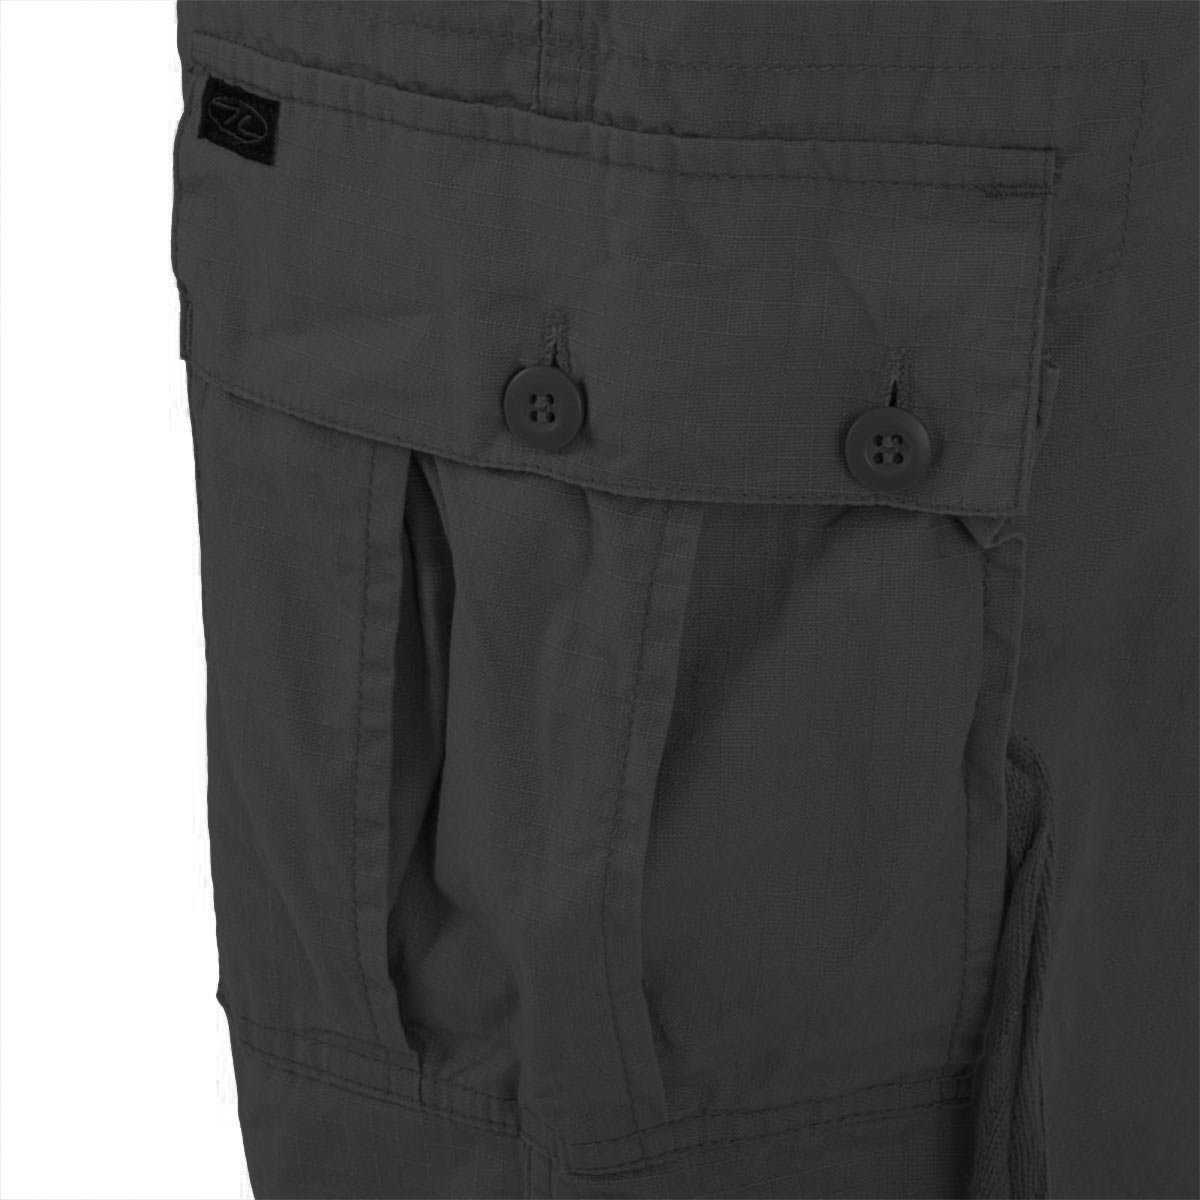 Highlander M65 Ripstop Combat Trousers Lightweight Cotton Military Army ...